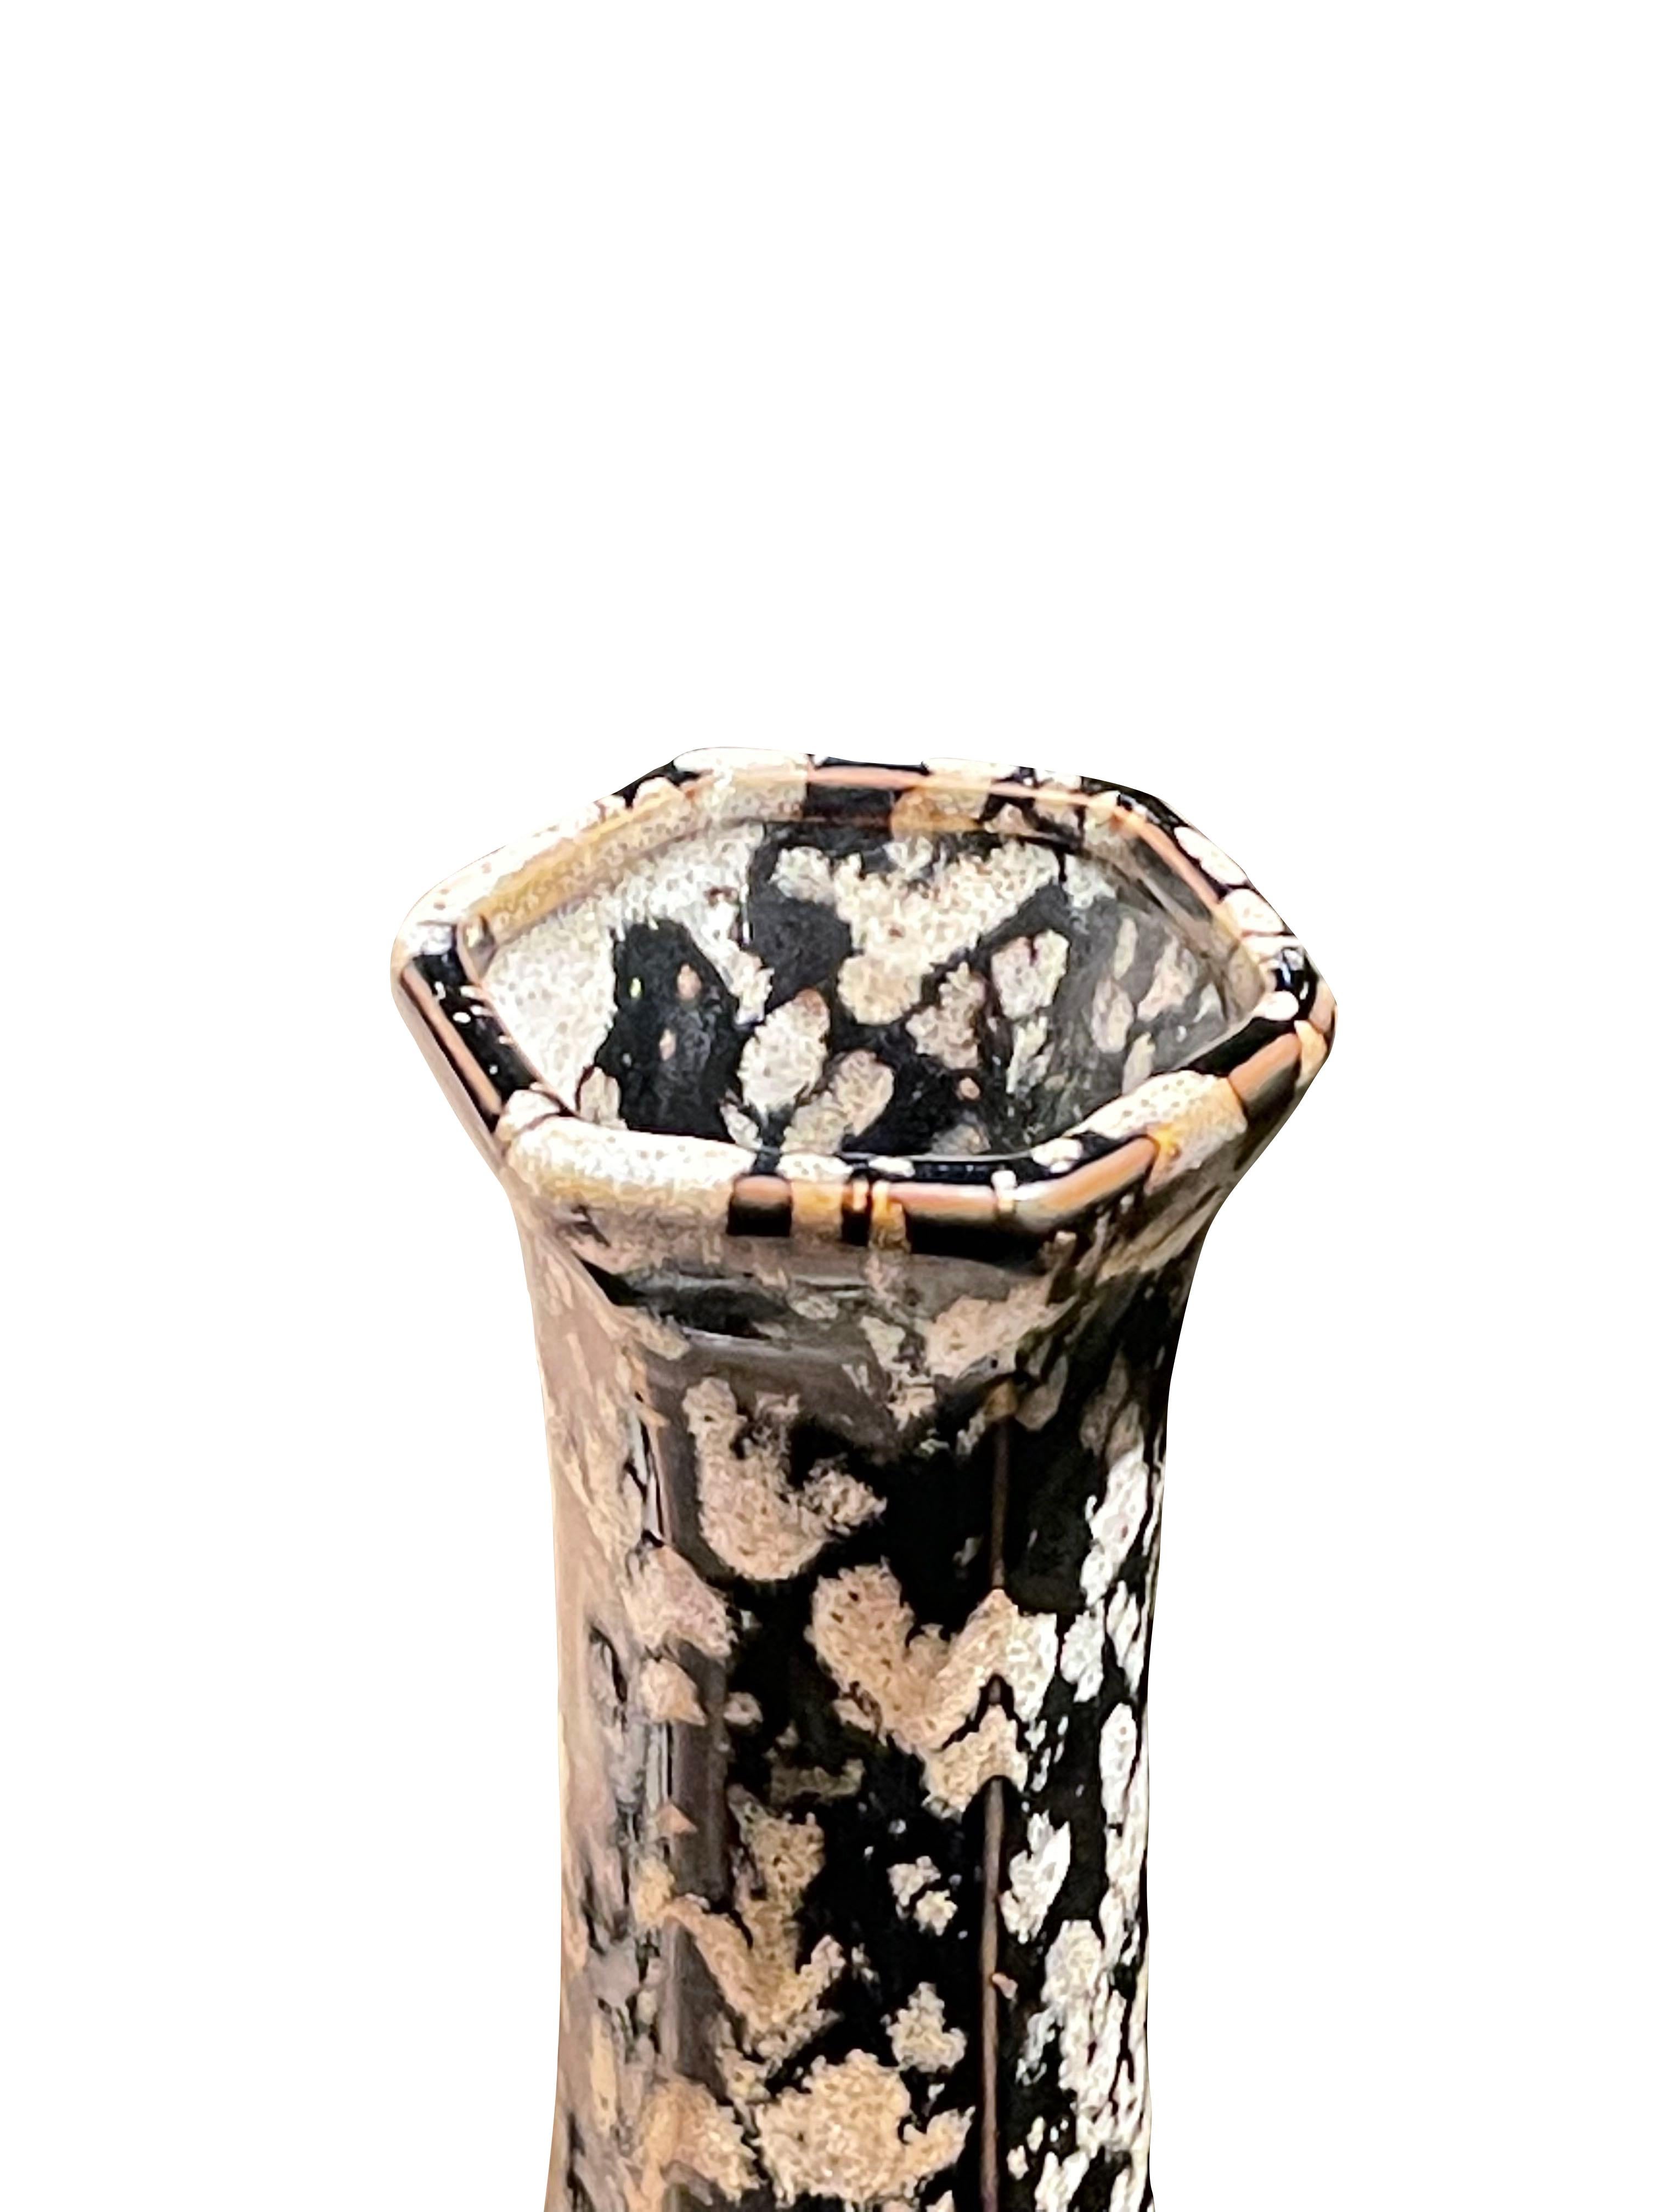 Contemporary Chinese tall thin vase with hexagonal shaped opening.
Black ground with white splatter glaze design.
Two available and sold individually.
